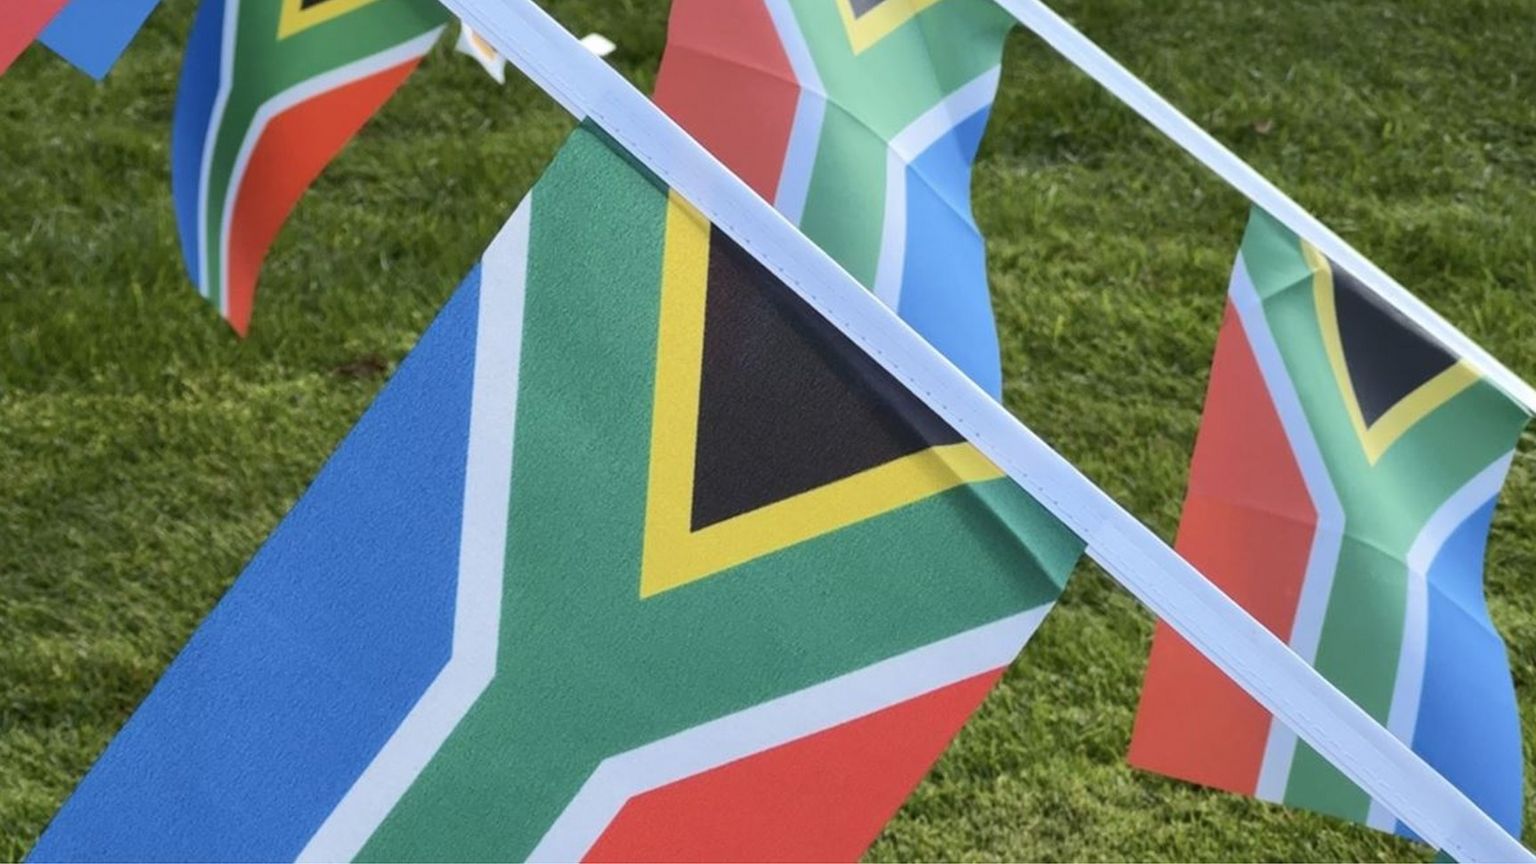 South African flags